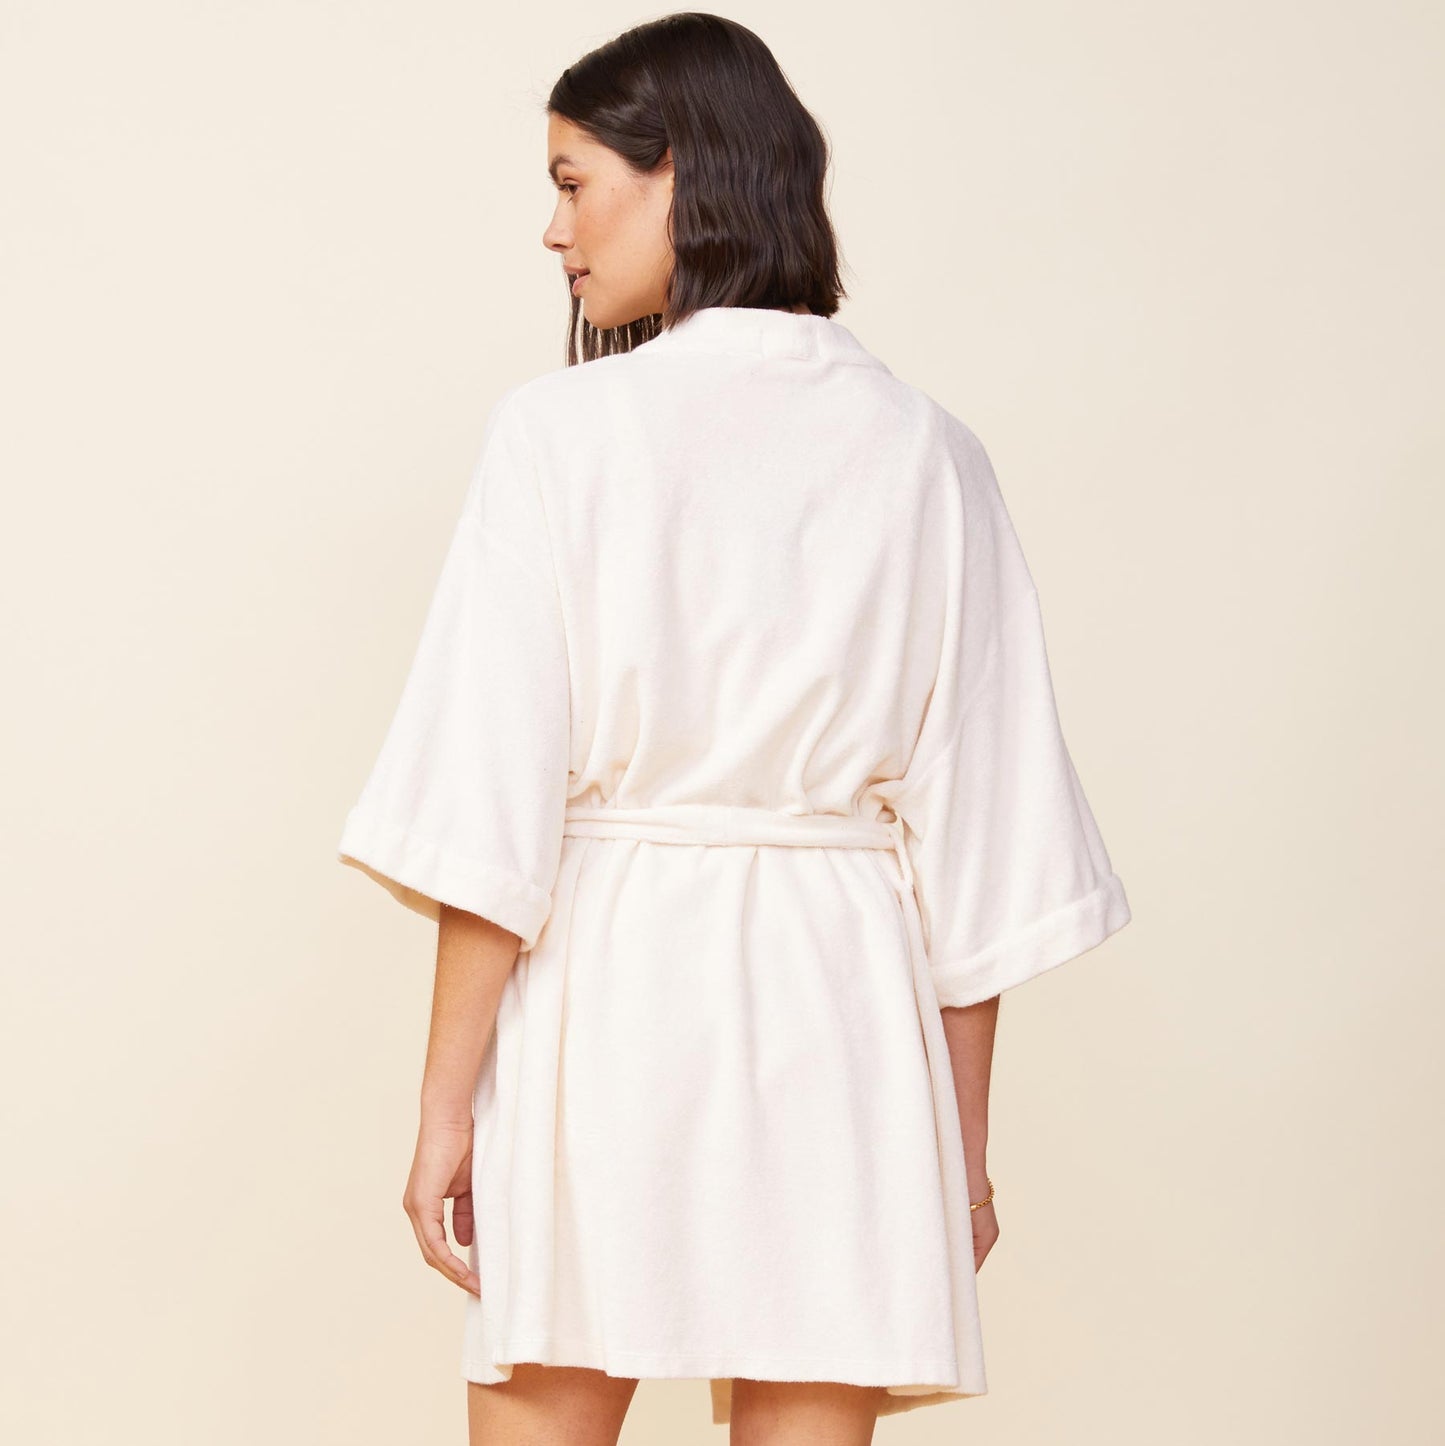 Back view of model wearing the terry cloth kimono in pearl.